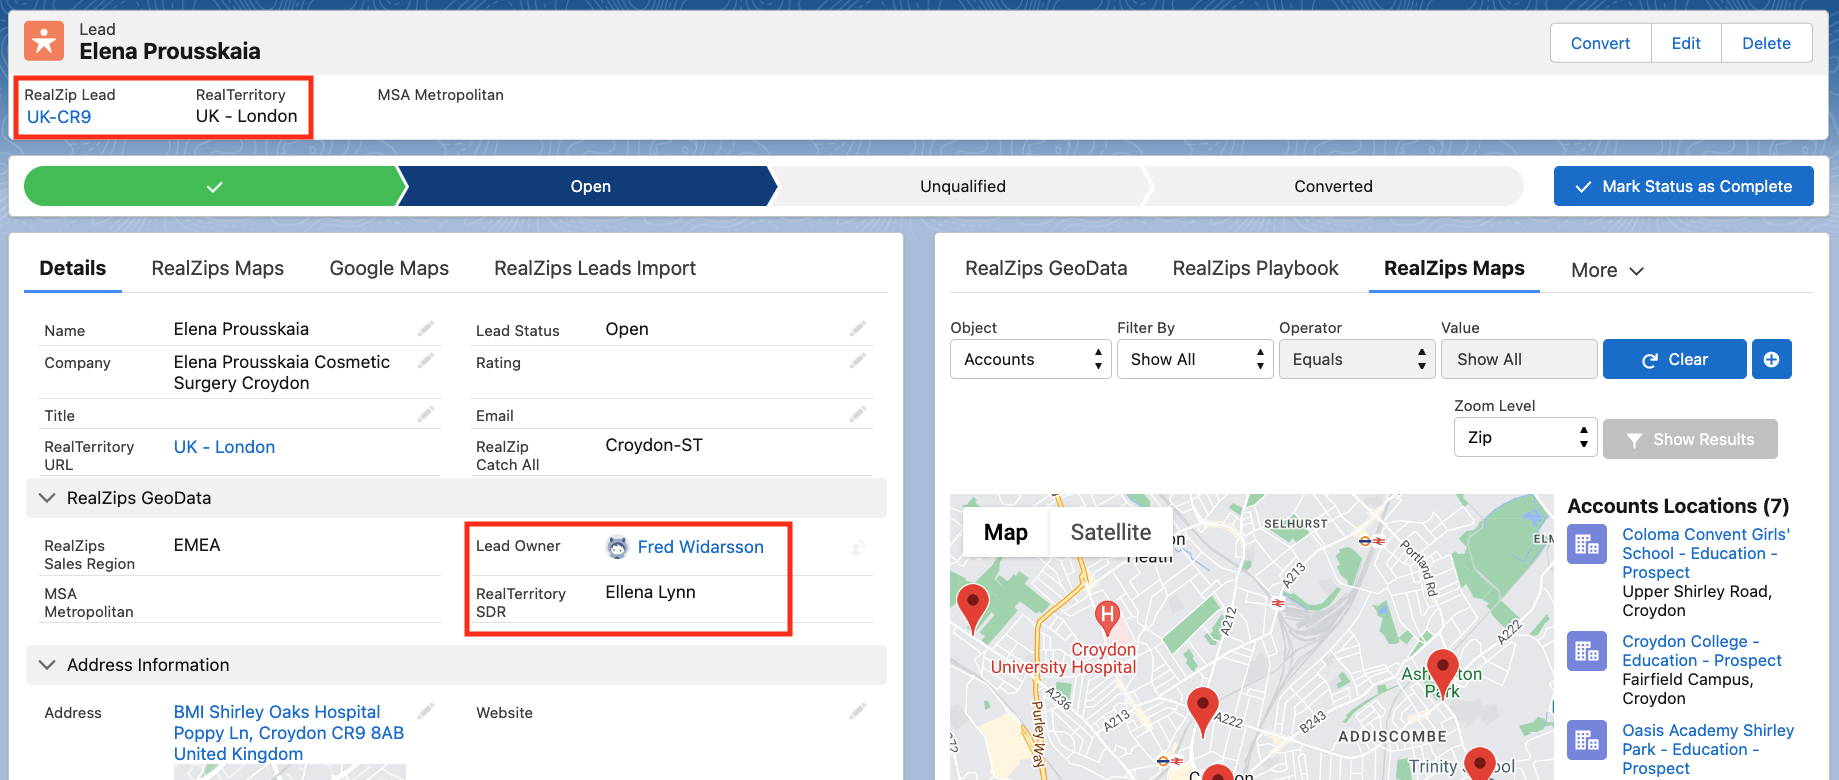 Global territory management in Salesforce example, with automatic lead routing for a lead in Croydon, UK.